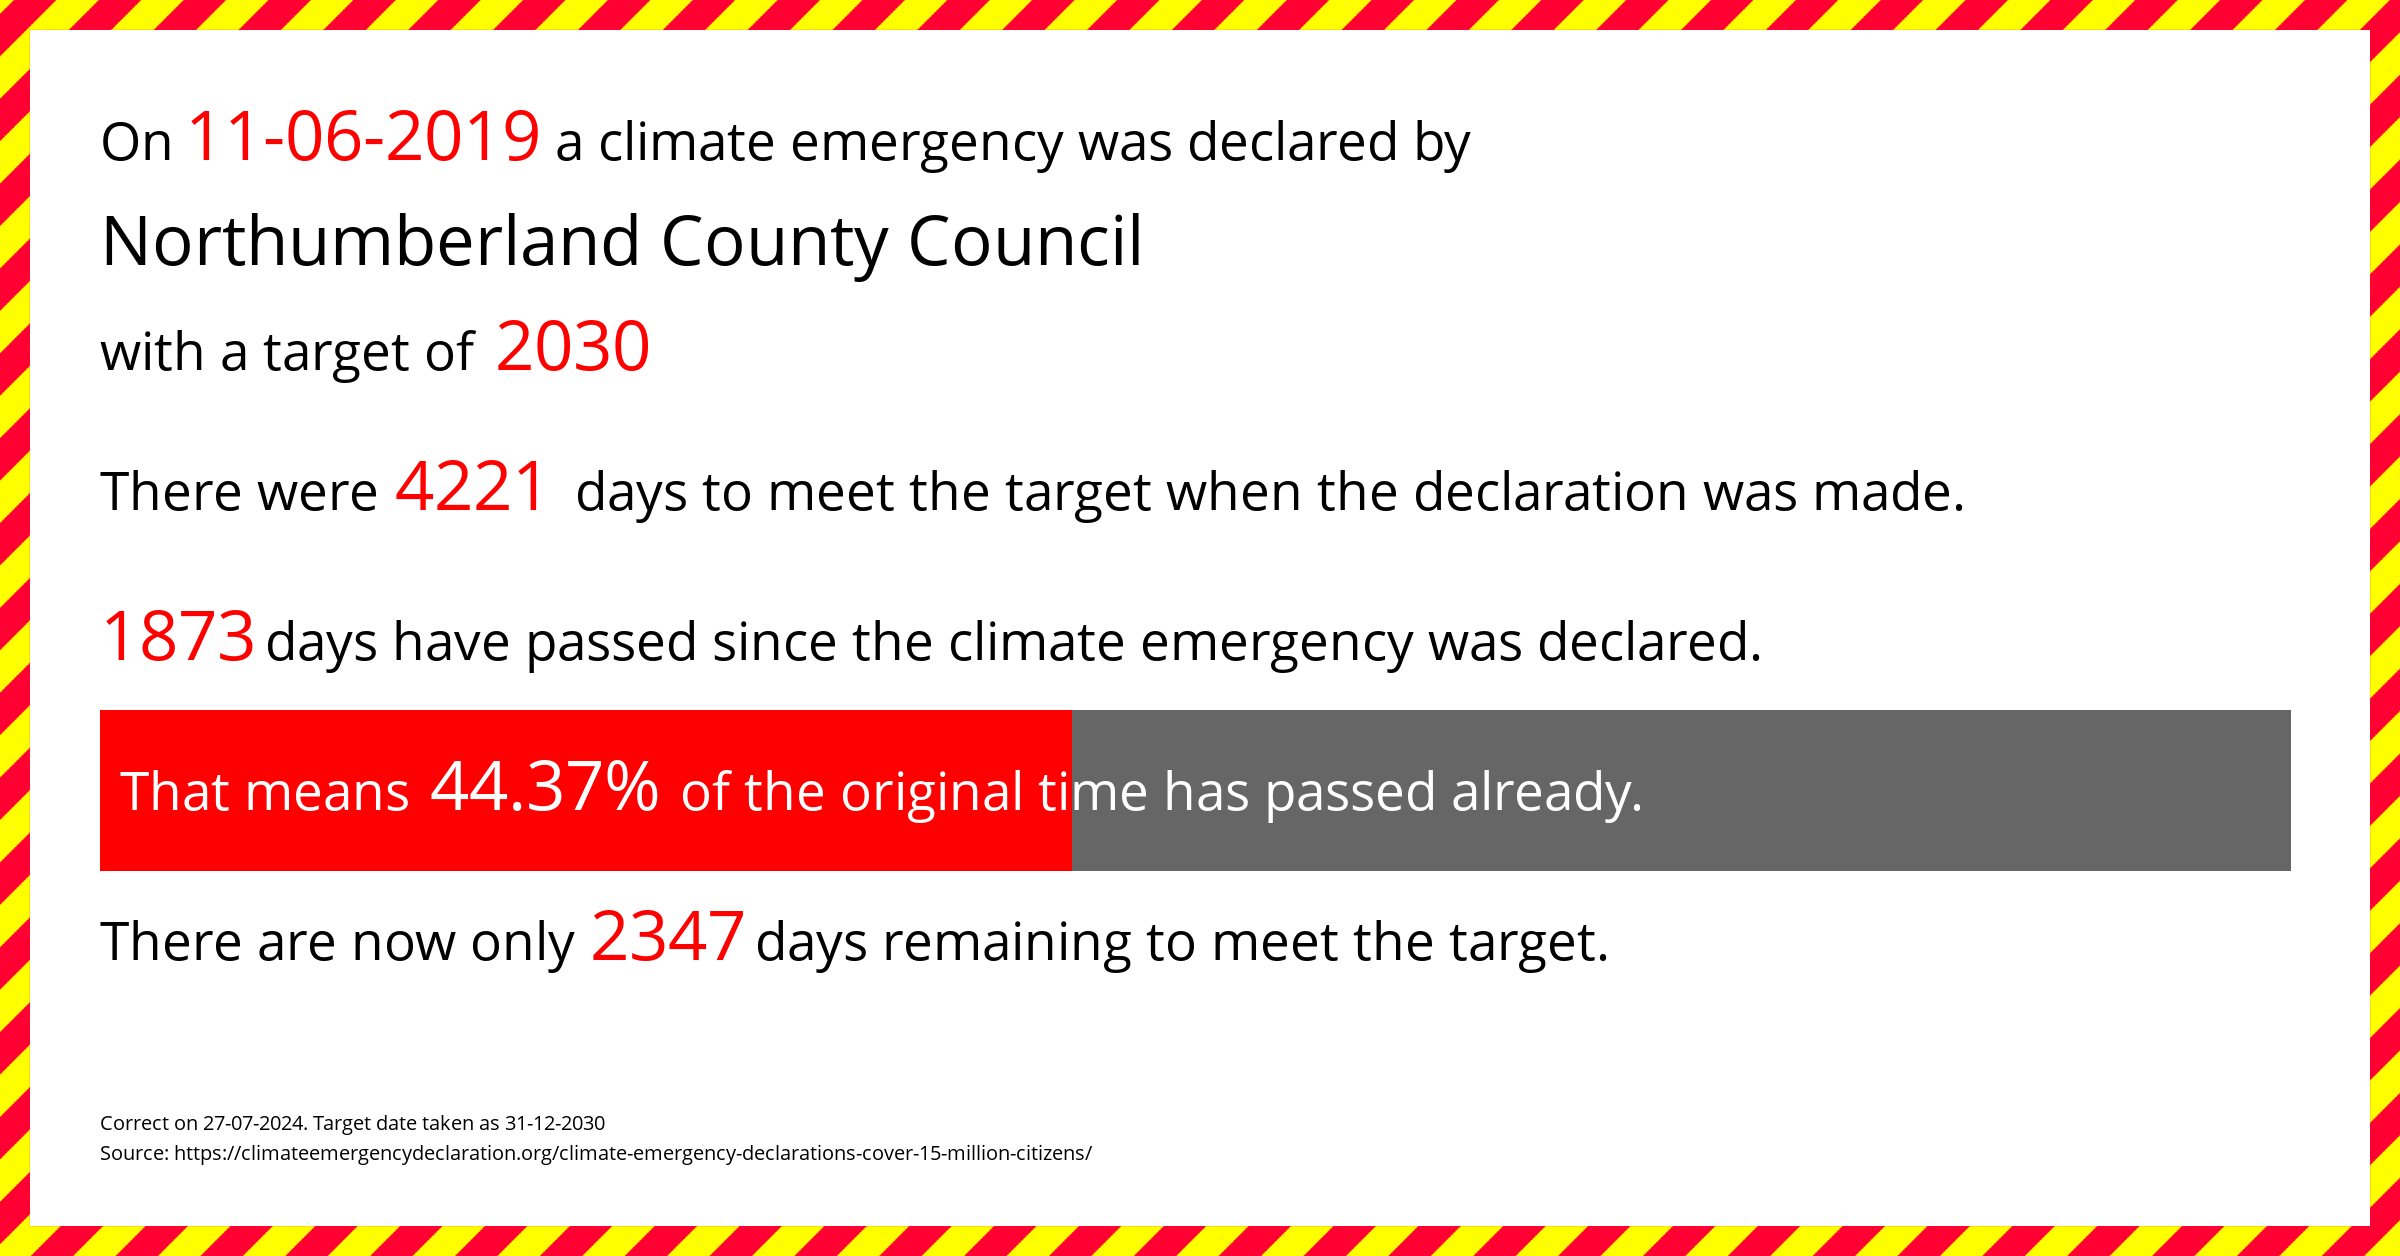 Northumberland County Council declared a Climate emergency on Tuesday 11th June 2019, with a target of 2030.